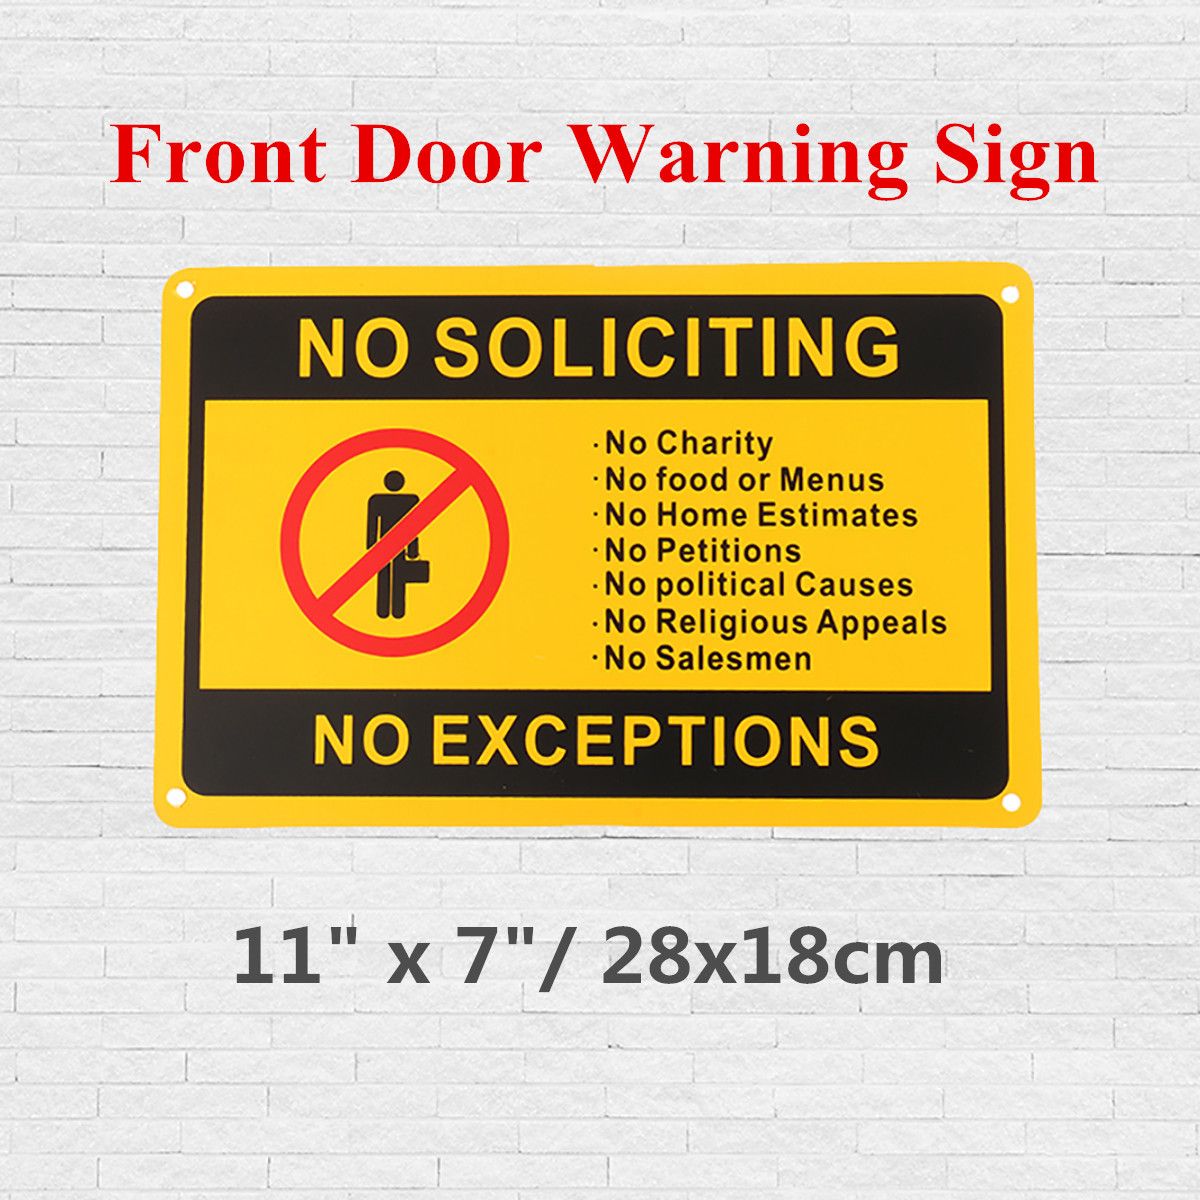 28x18cm-No-Soliciting-No-Exceptions-Front-Door-Sign-Security-Warning-Sticker-Waterproof-1386793